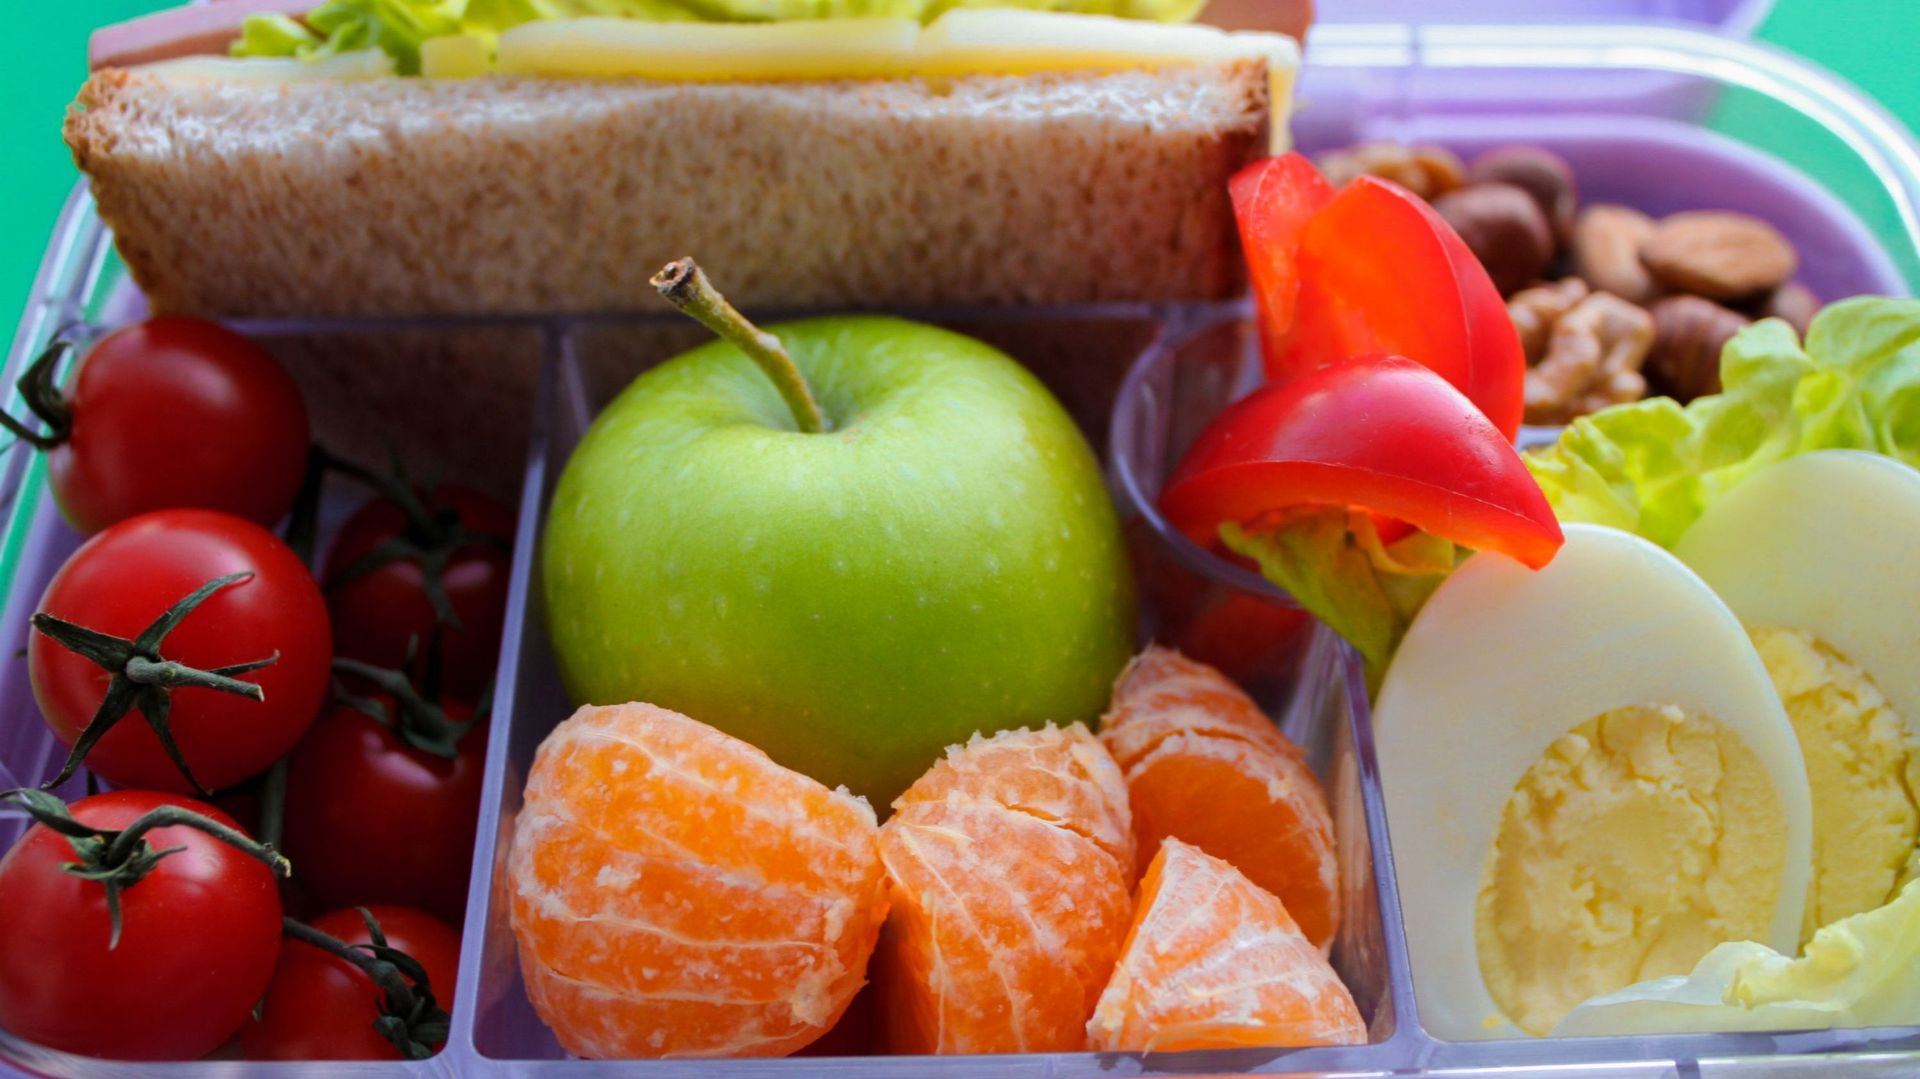 Close up of lilac lunch box with useful food for lunch and snack : sandwich, vegetables, fruits, nuts and eggs. Concept of healthy food, snack for adults and kids